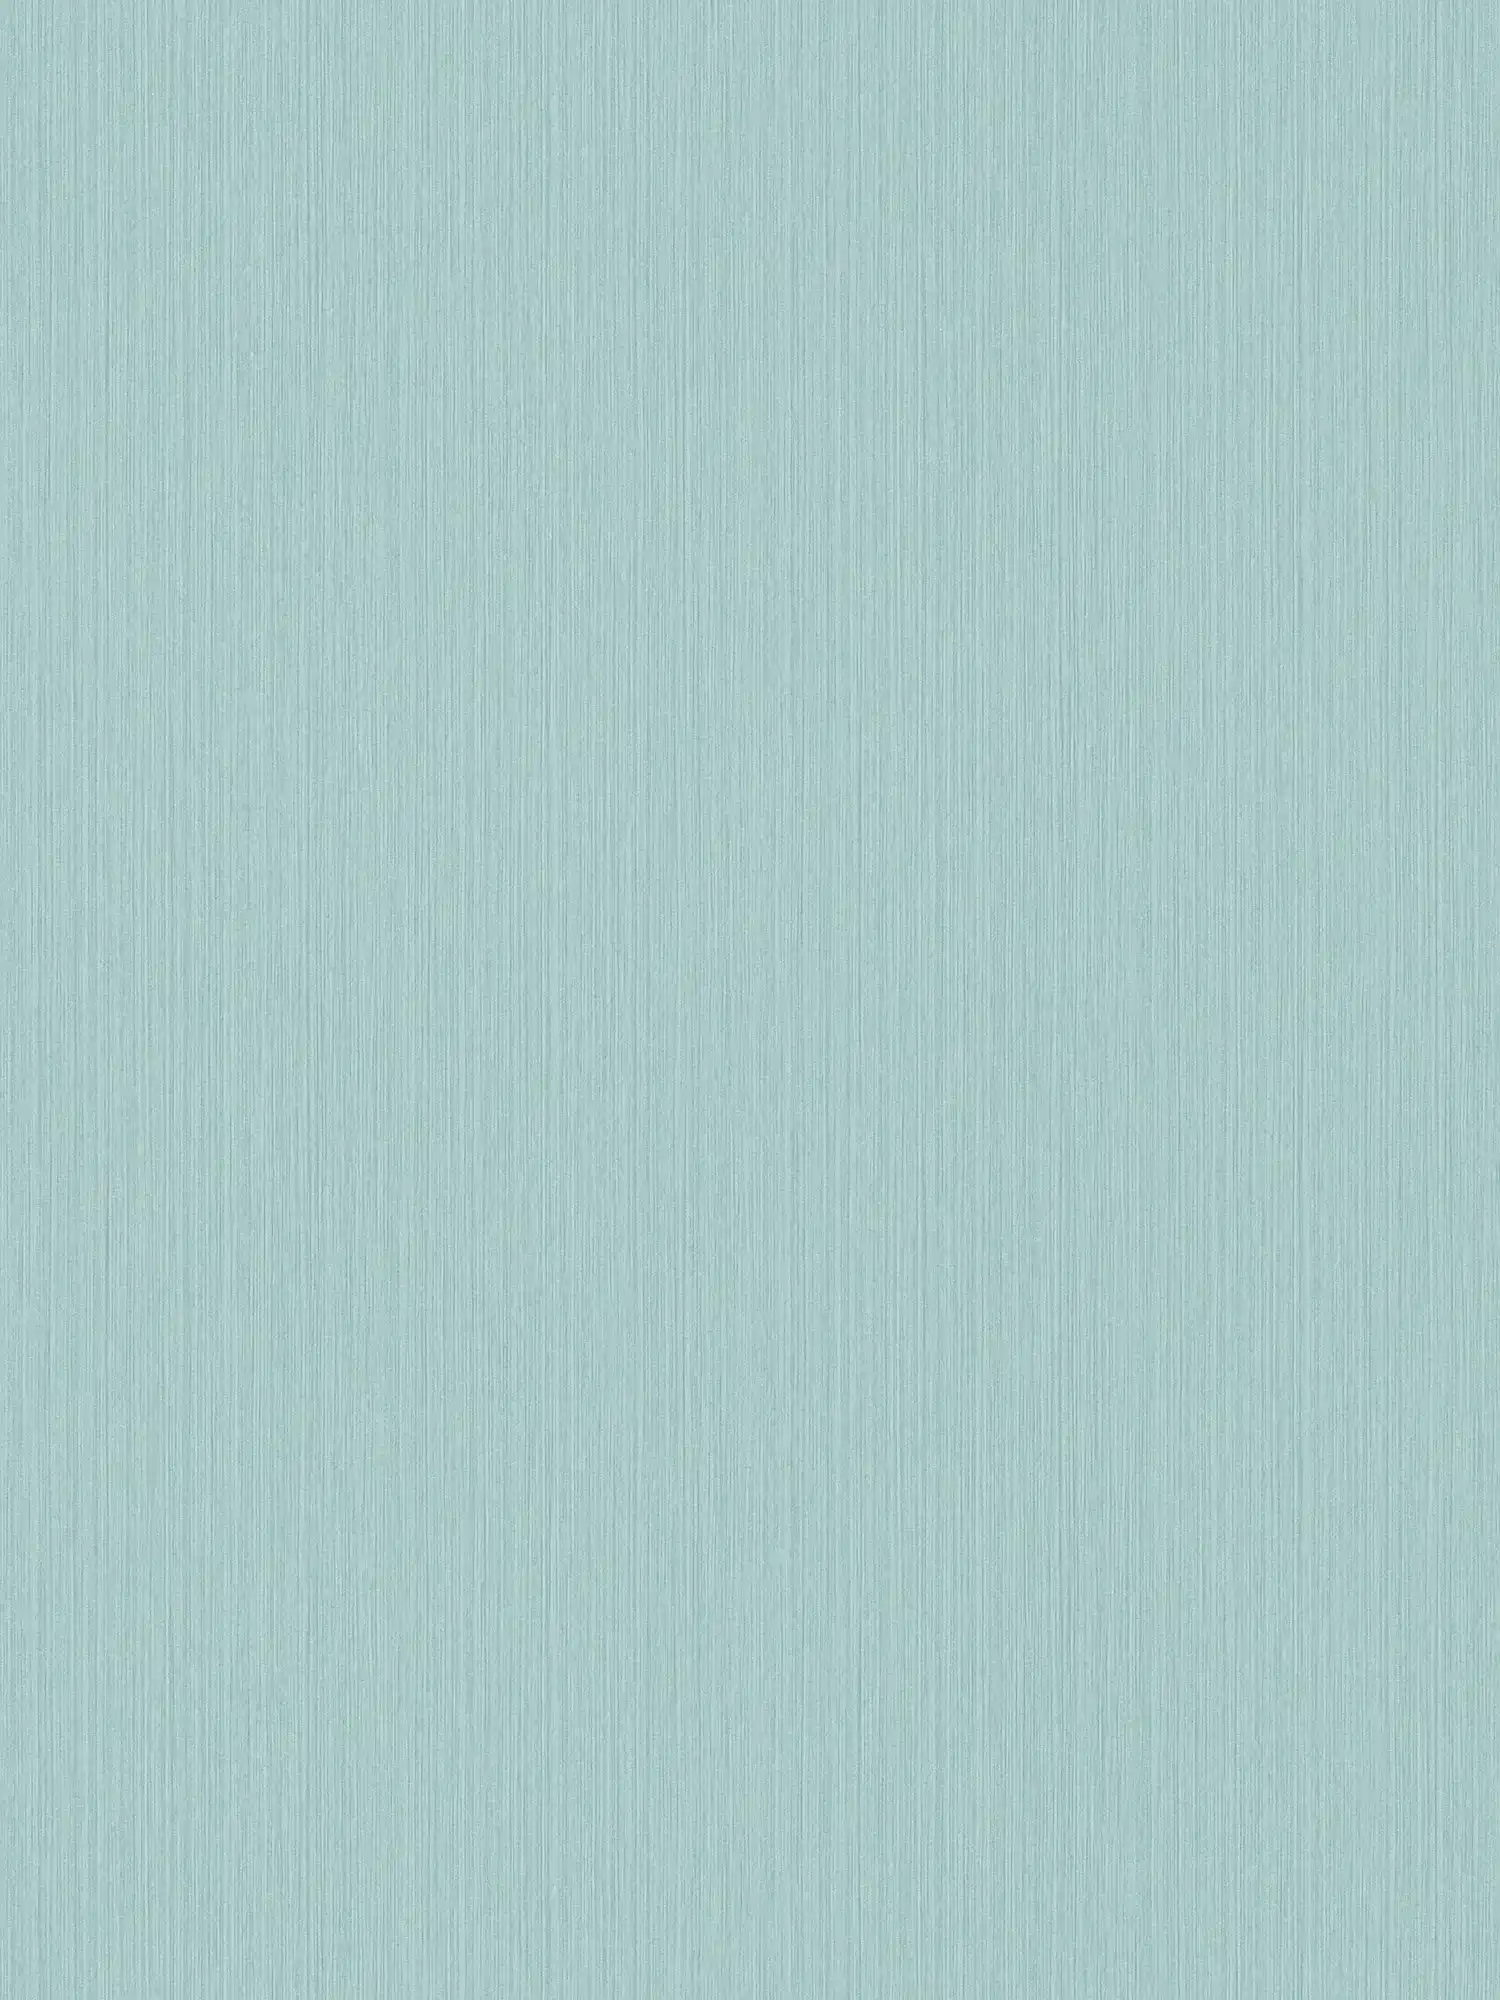 Plain wallpaper light blue with mottled textile effect by MICHALSKY
